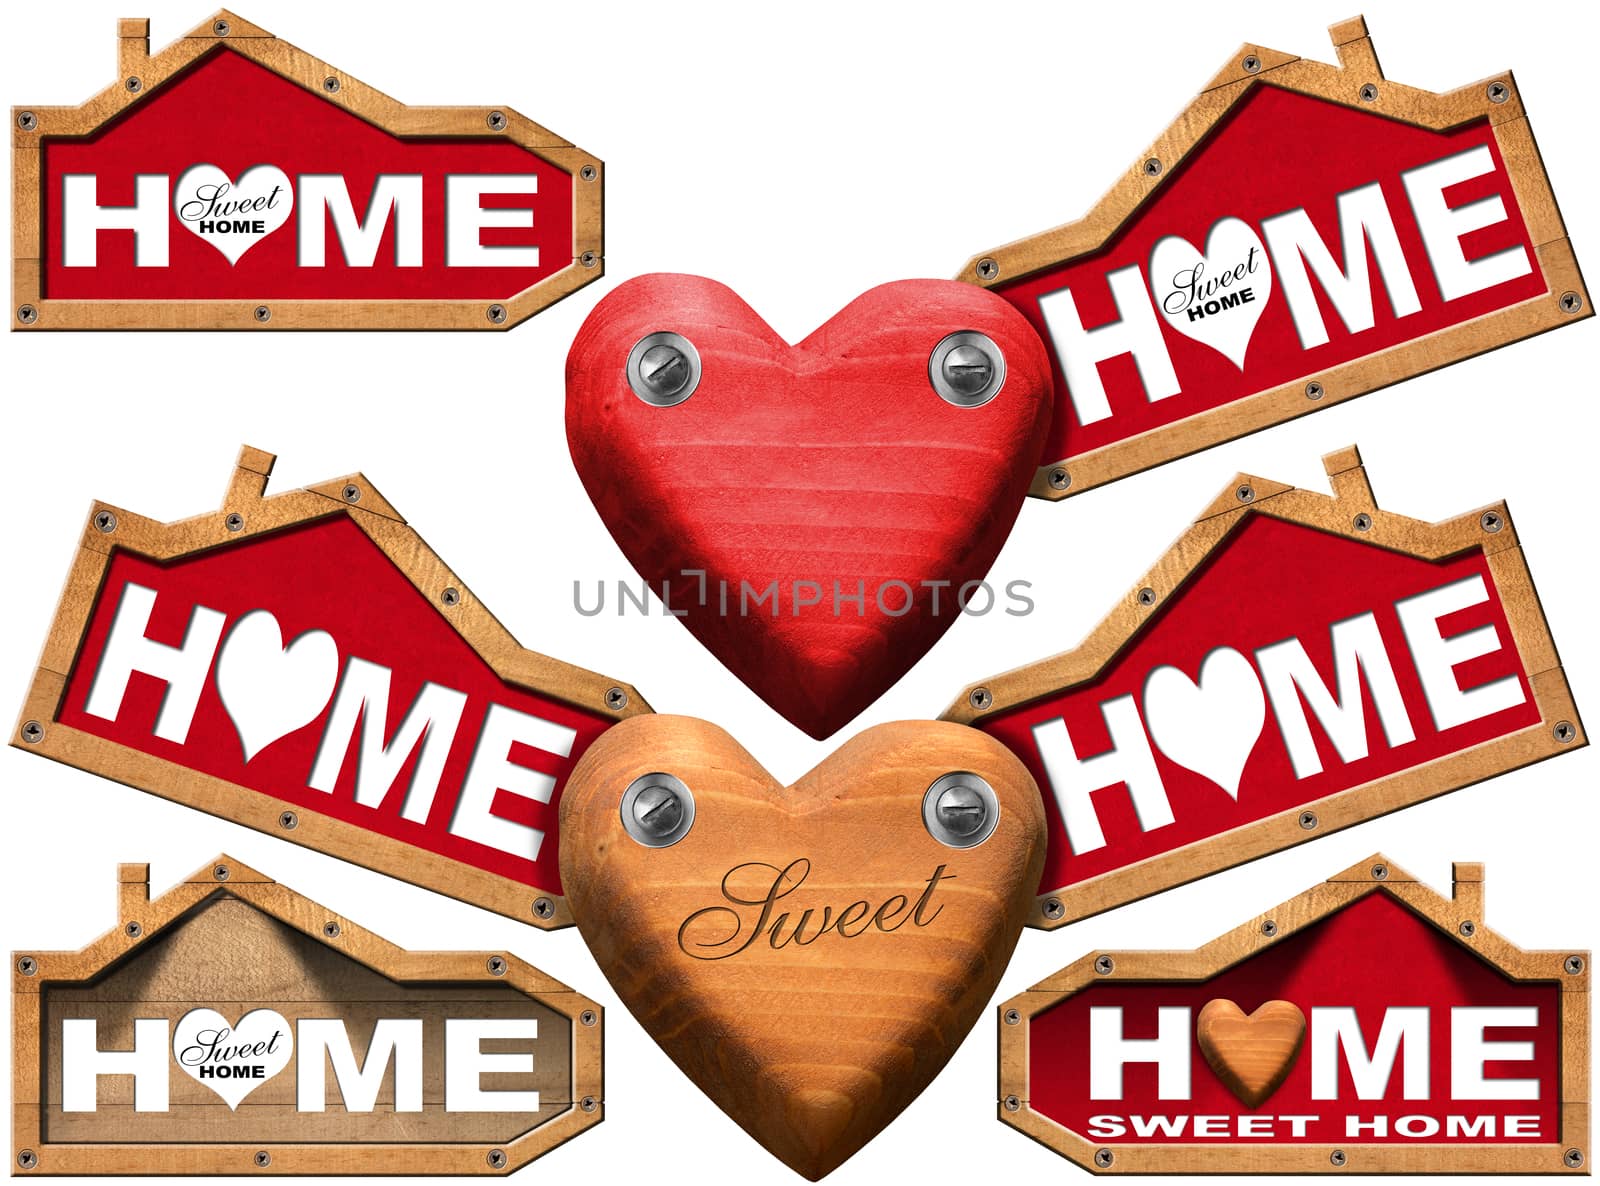 Collection of wooden and red labels with text Home sweet home and wooden heart. Isolated on white background